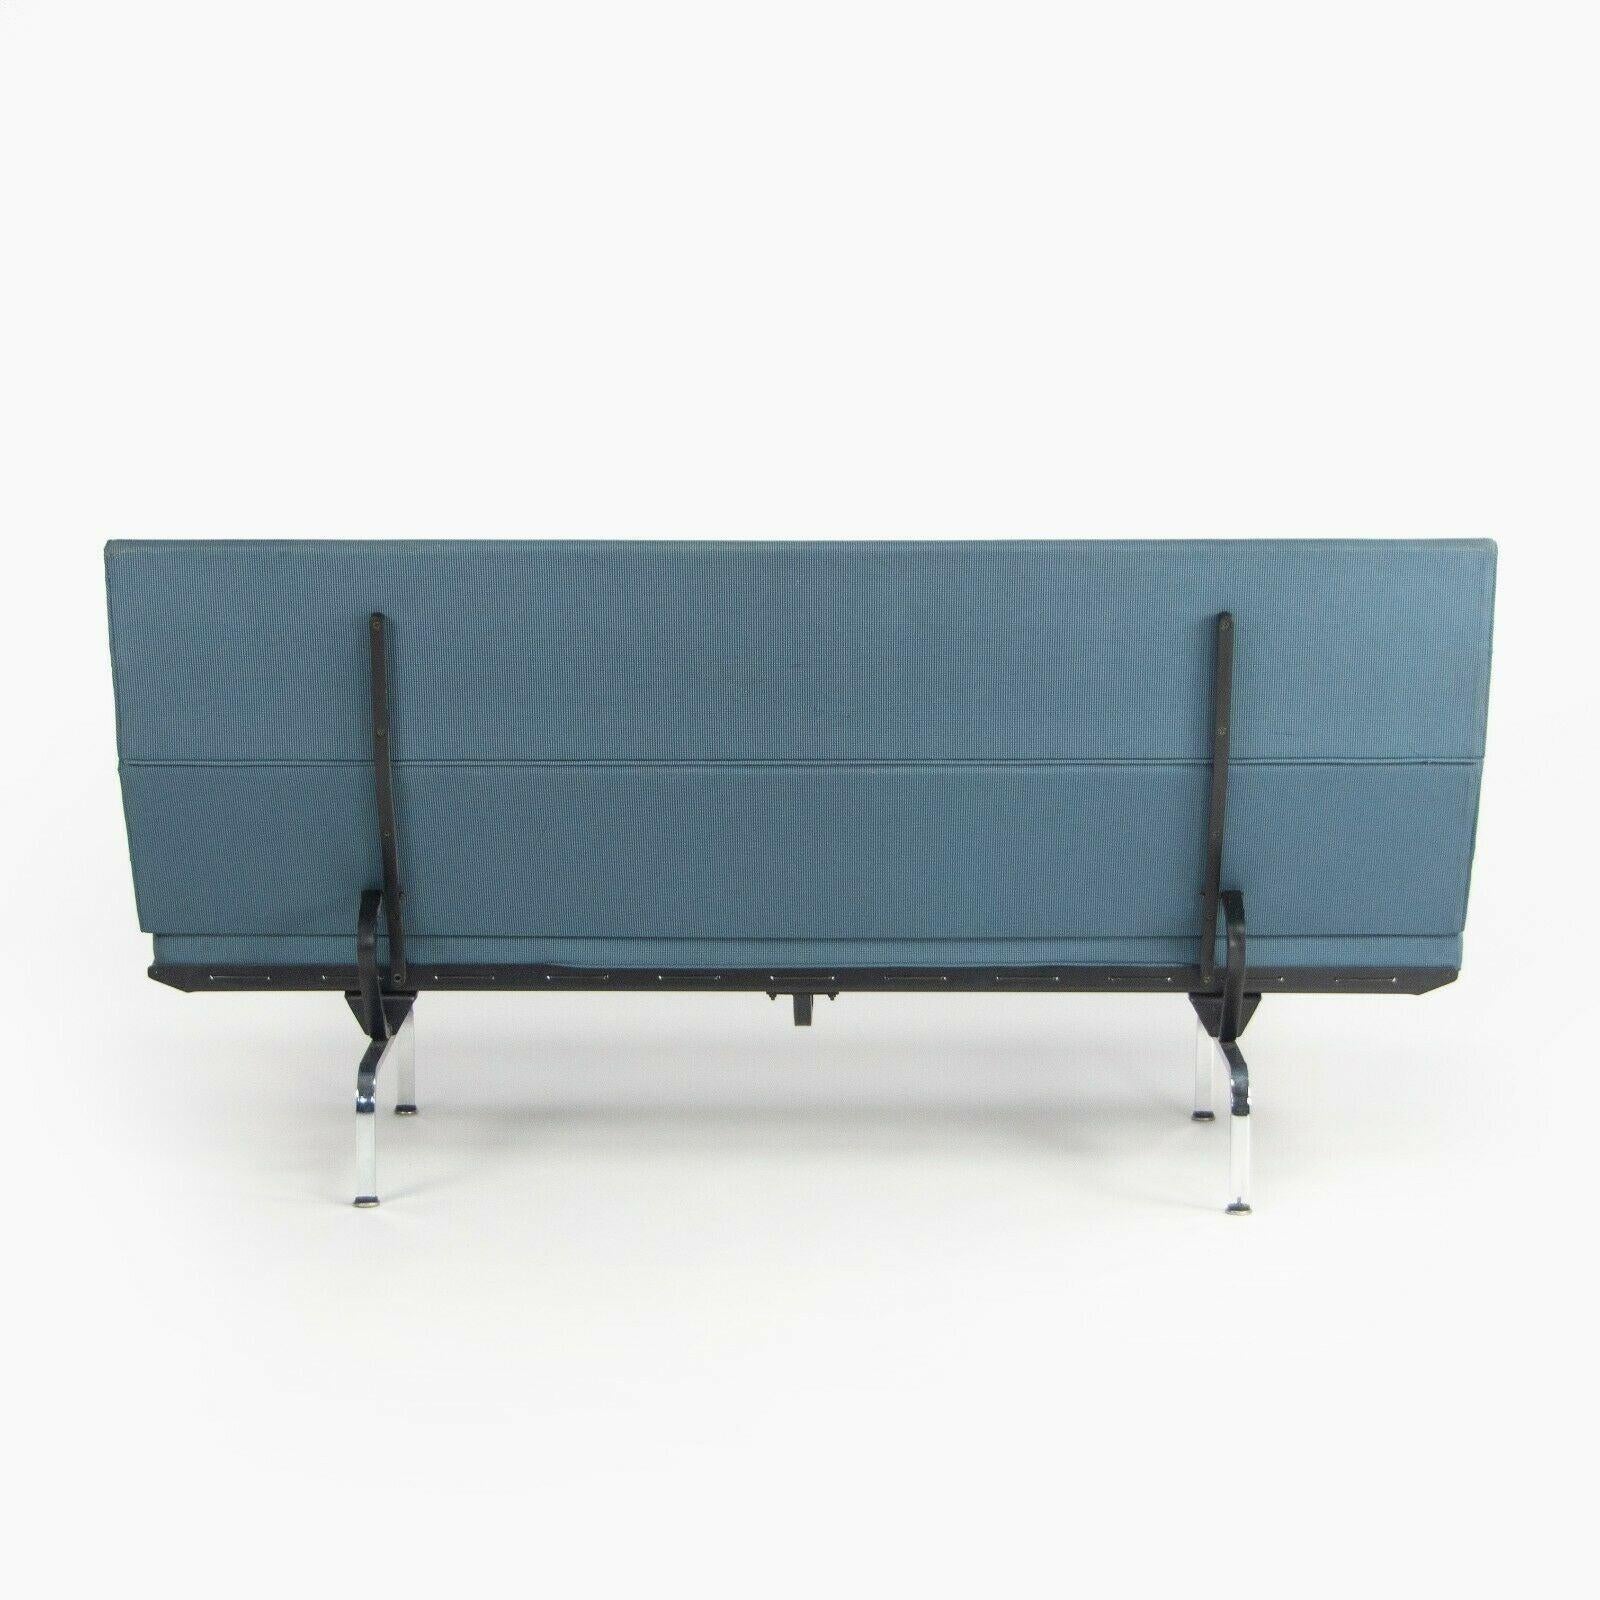 Modern 2006 Herman Miller by Ray and Charles Eames Sofa Compact Blue Fabric Upholstery For Sale